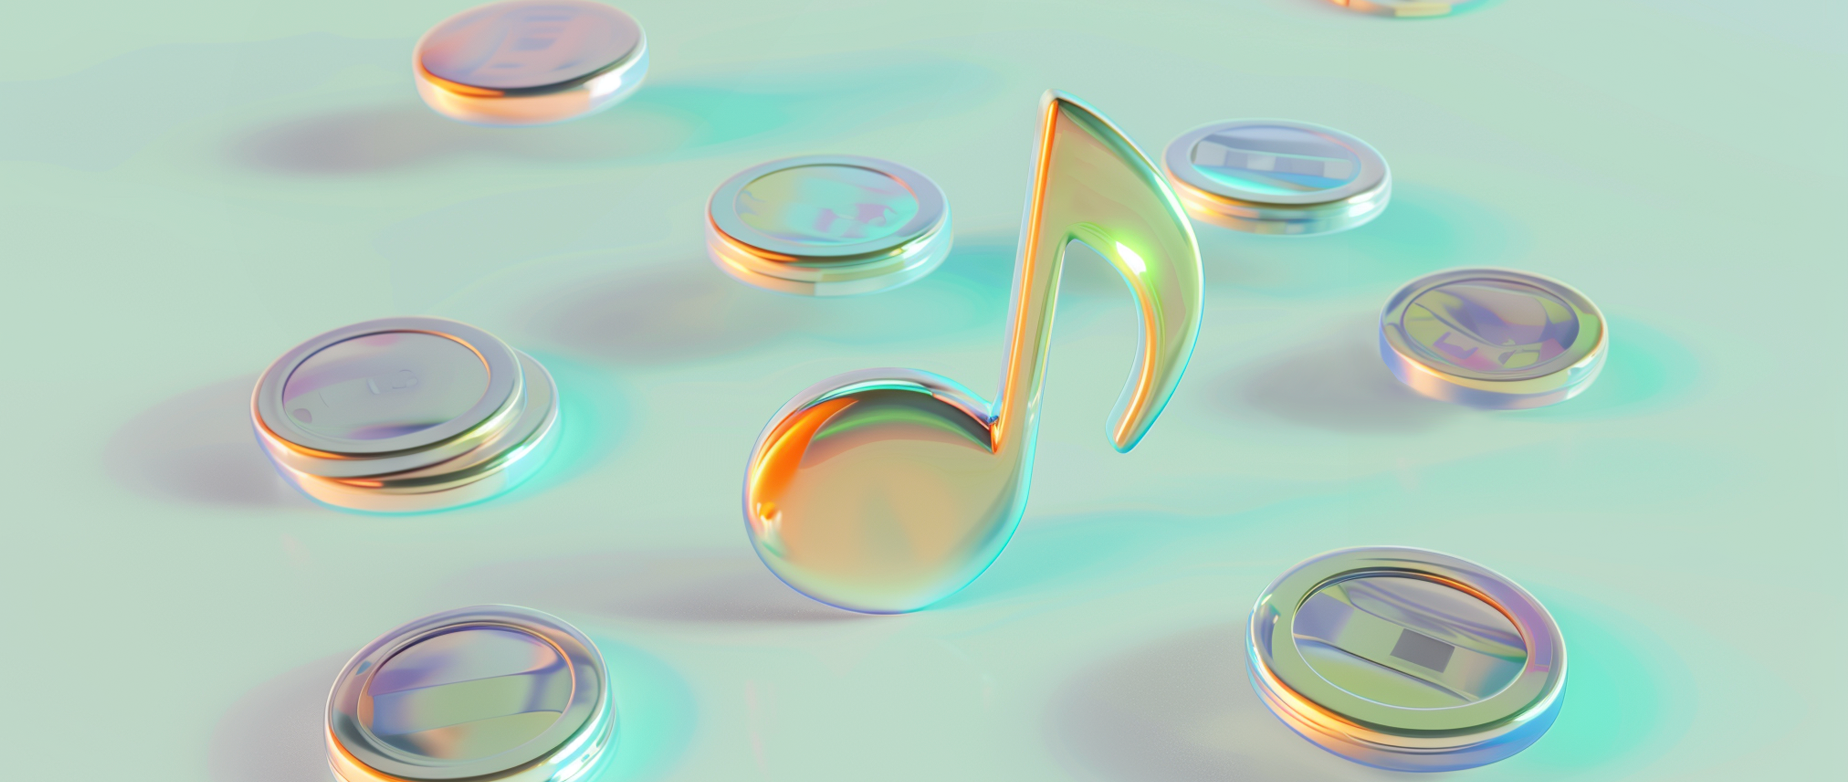 A gold musical note surrounded by silver coins on a green background.